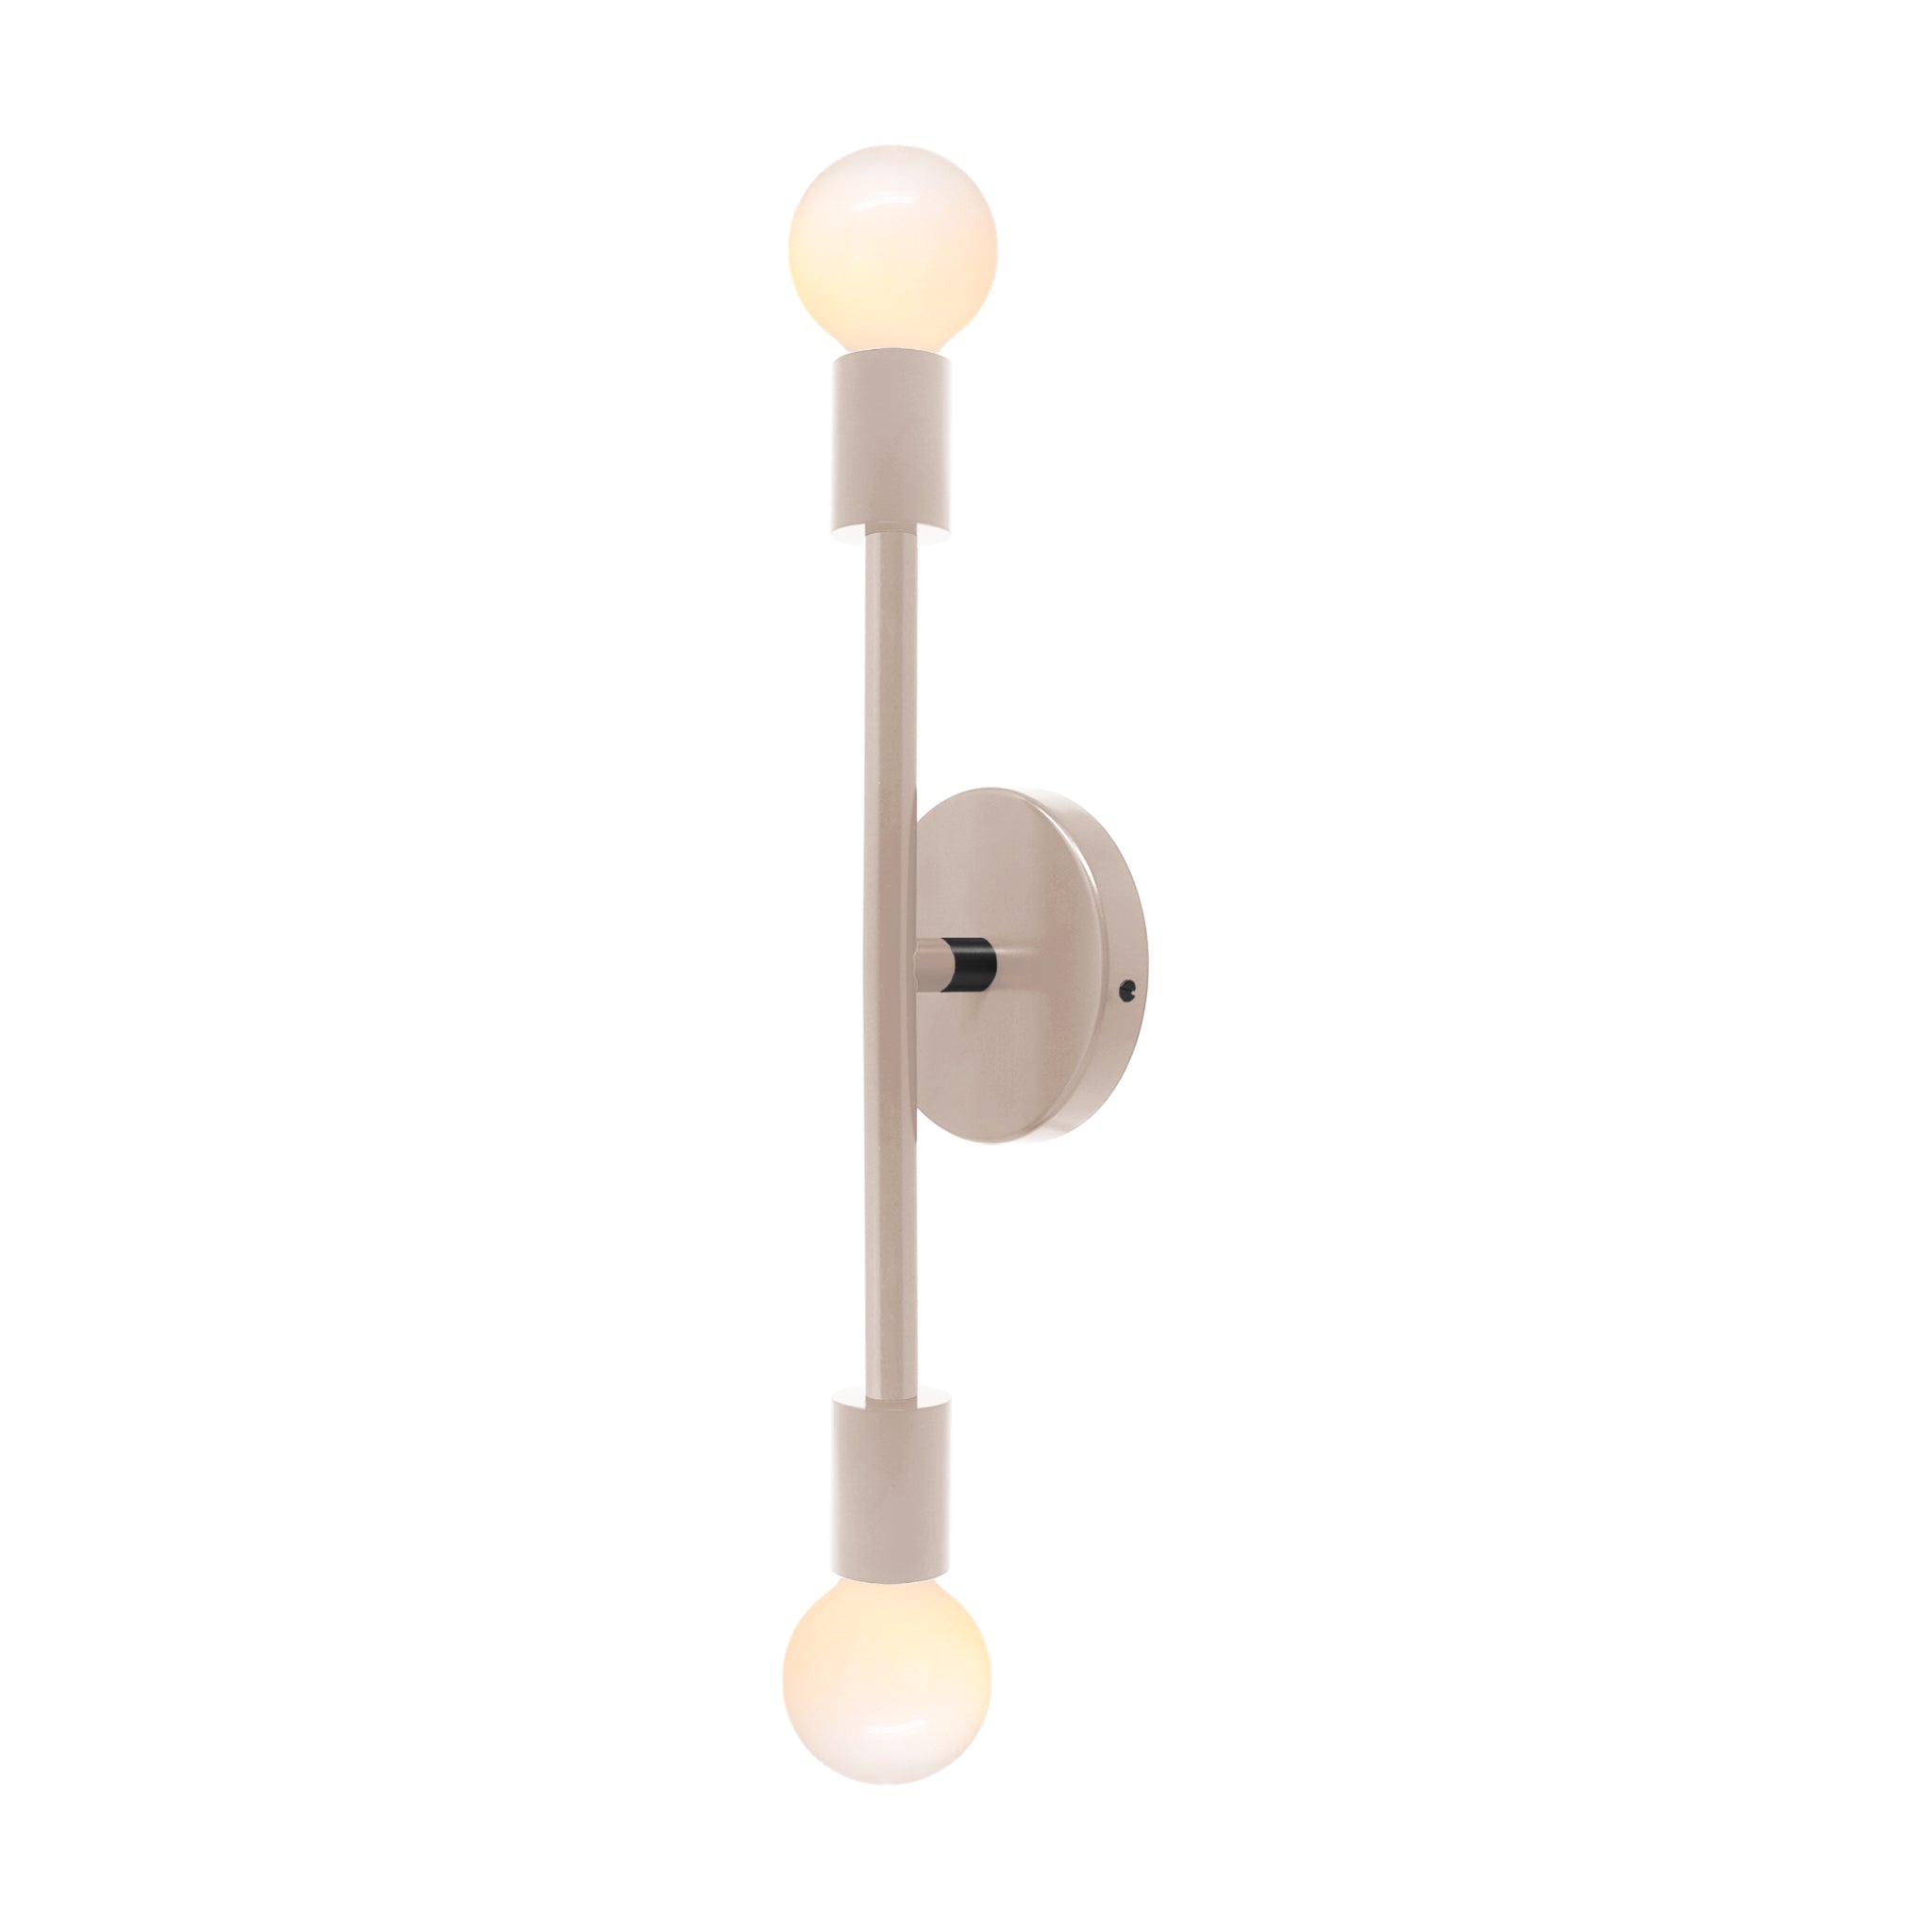 Black and barely color Pilot sconce 17" Dutton Brown lighting